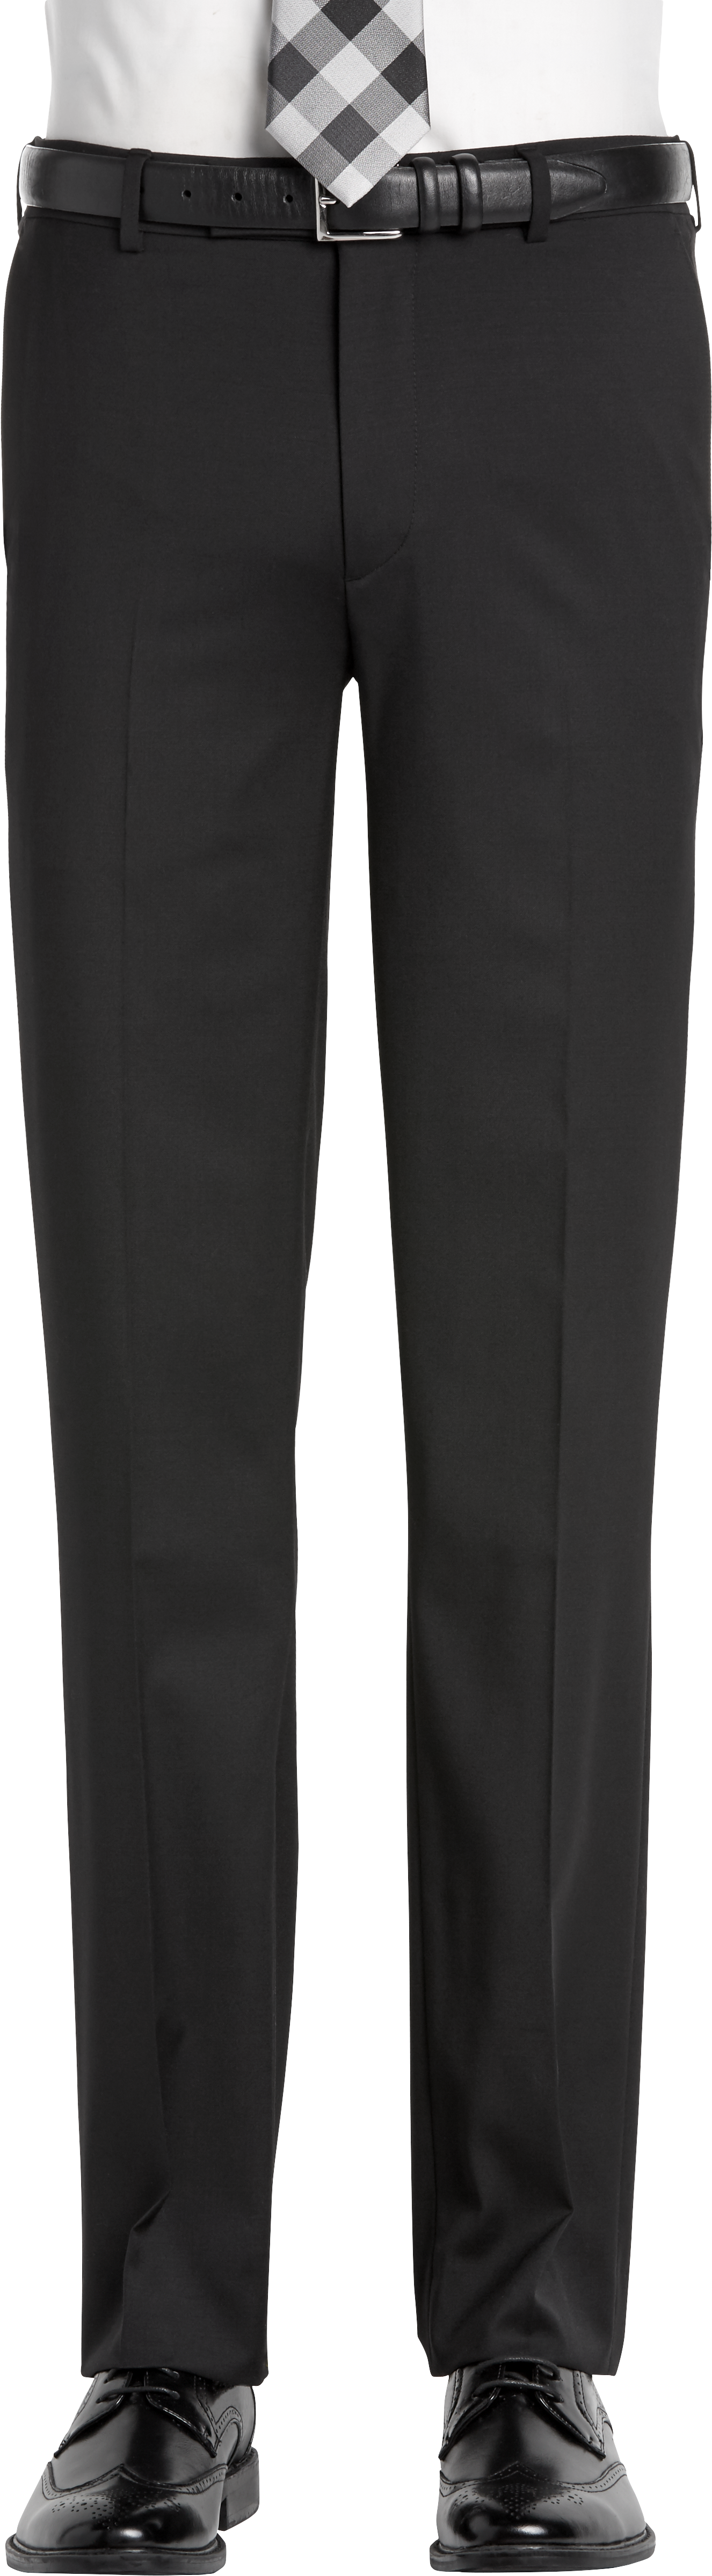 Awearness Kenneth Cole AWEAR-TECH Black Extreme Slim Fit Suit Separates ...